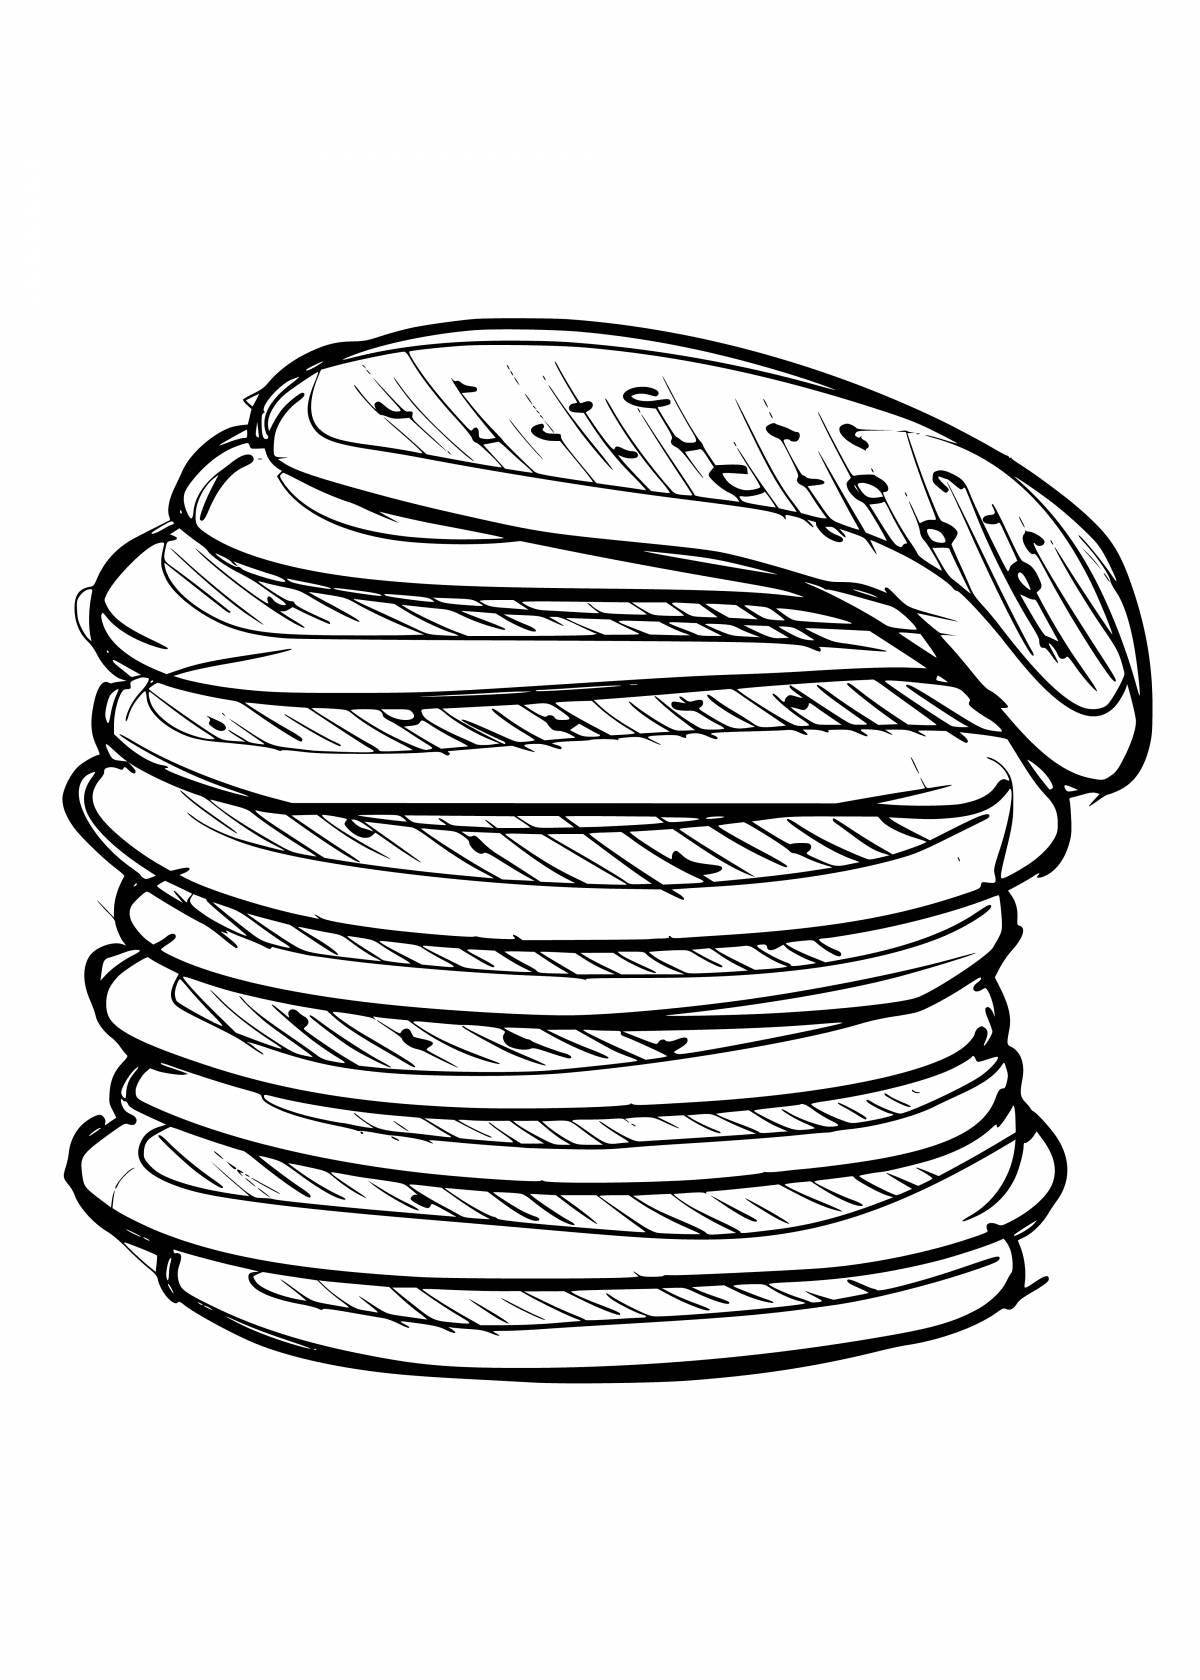 Adorable pancakes coloring book for kids